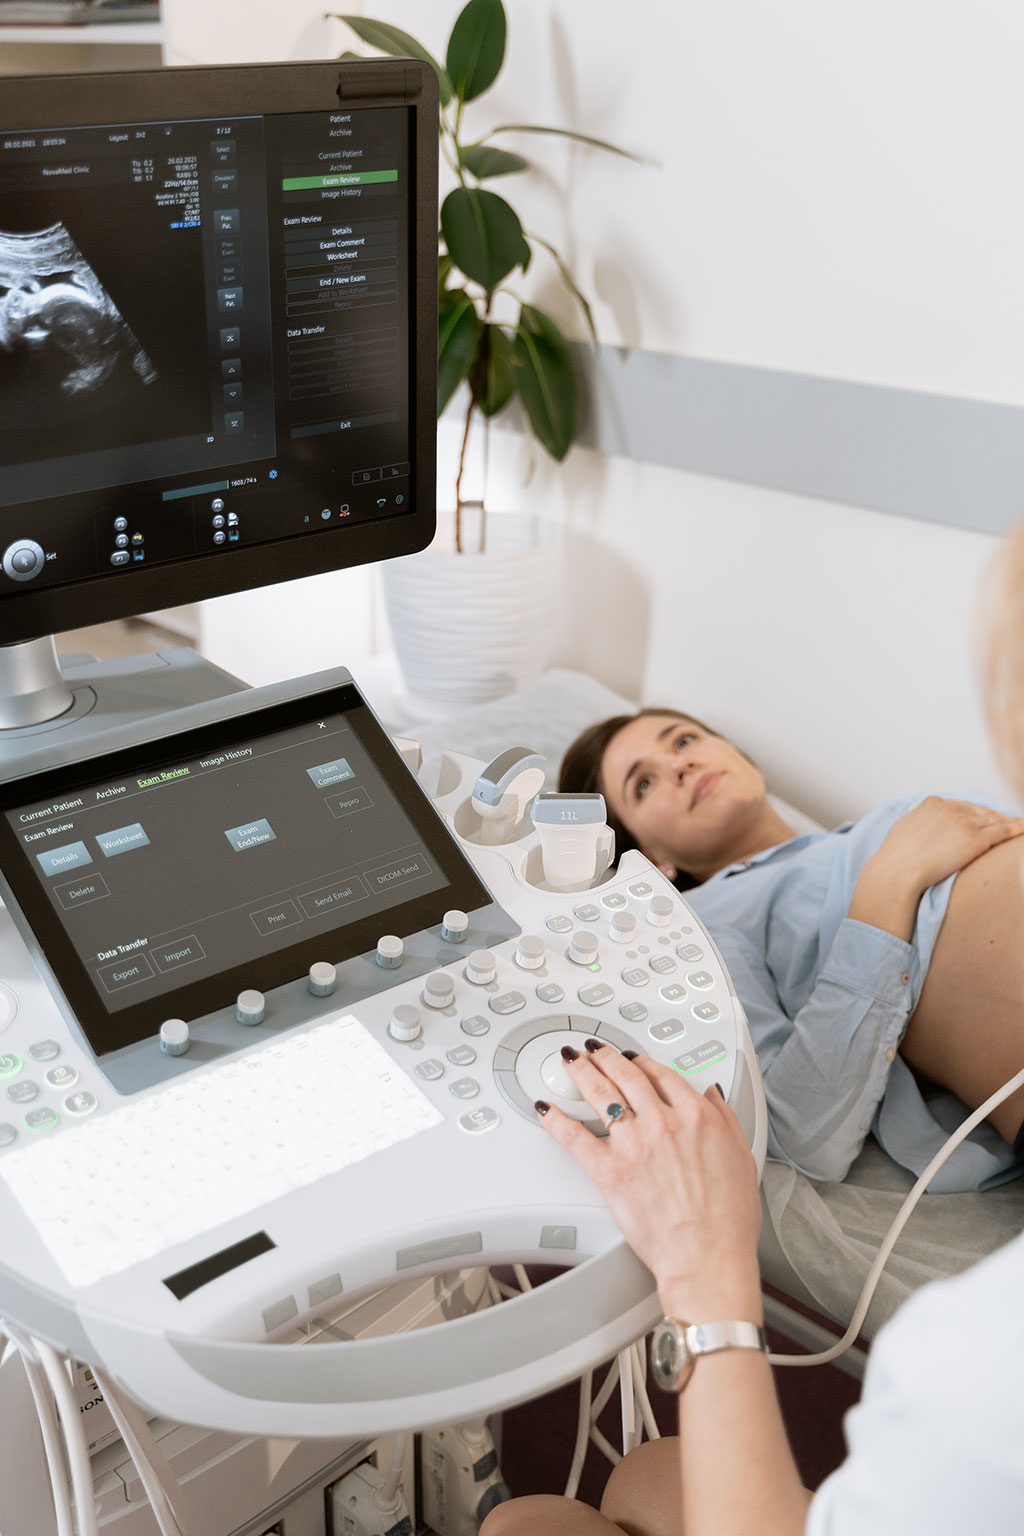 Image: Simple diagnostic procedure and treatment can provide clarity on infertility and hope for conception (Photo courtesy of Pexels)